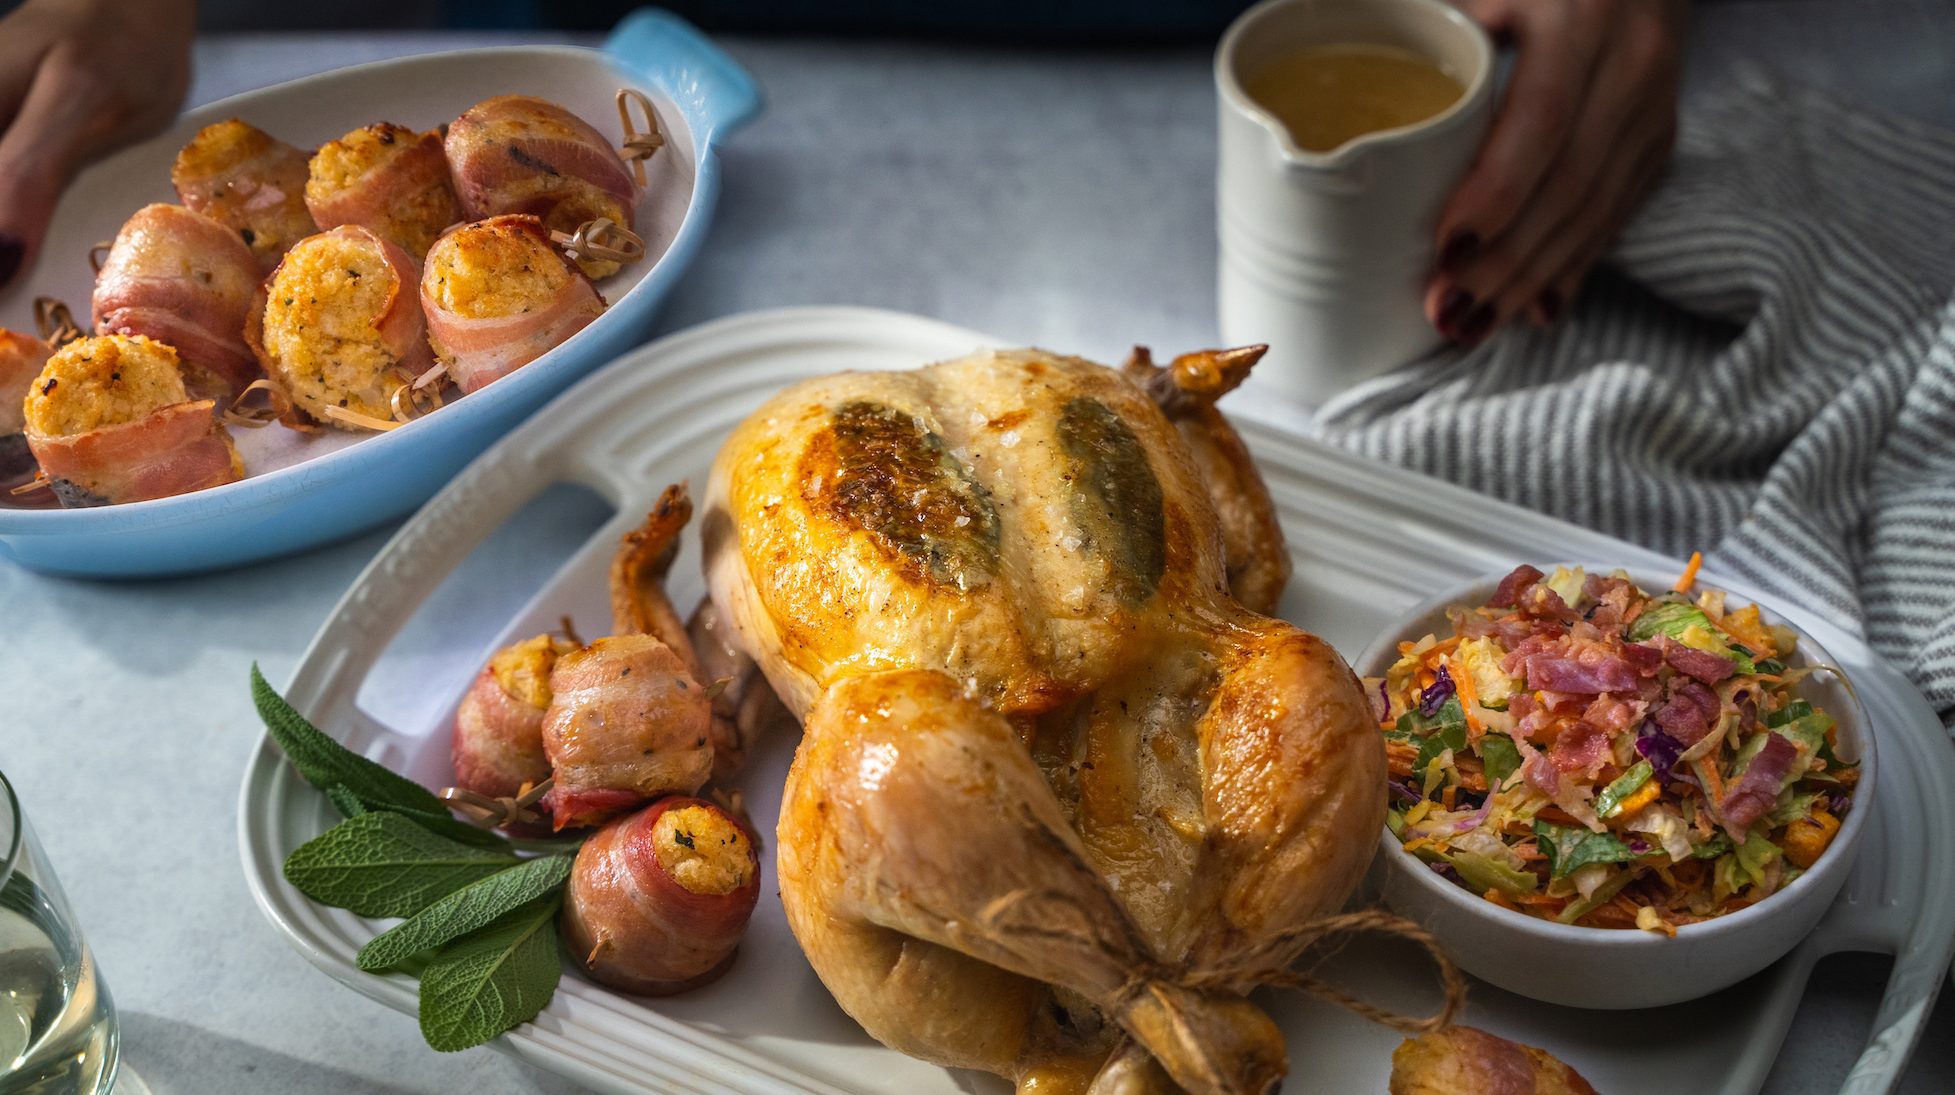 Roast chicken on a tray with bacon-wrapped stuffing balls, a bowl of coleslaw and a jug of gravy